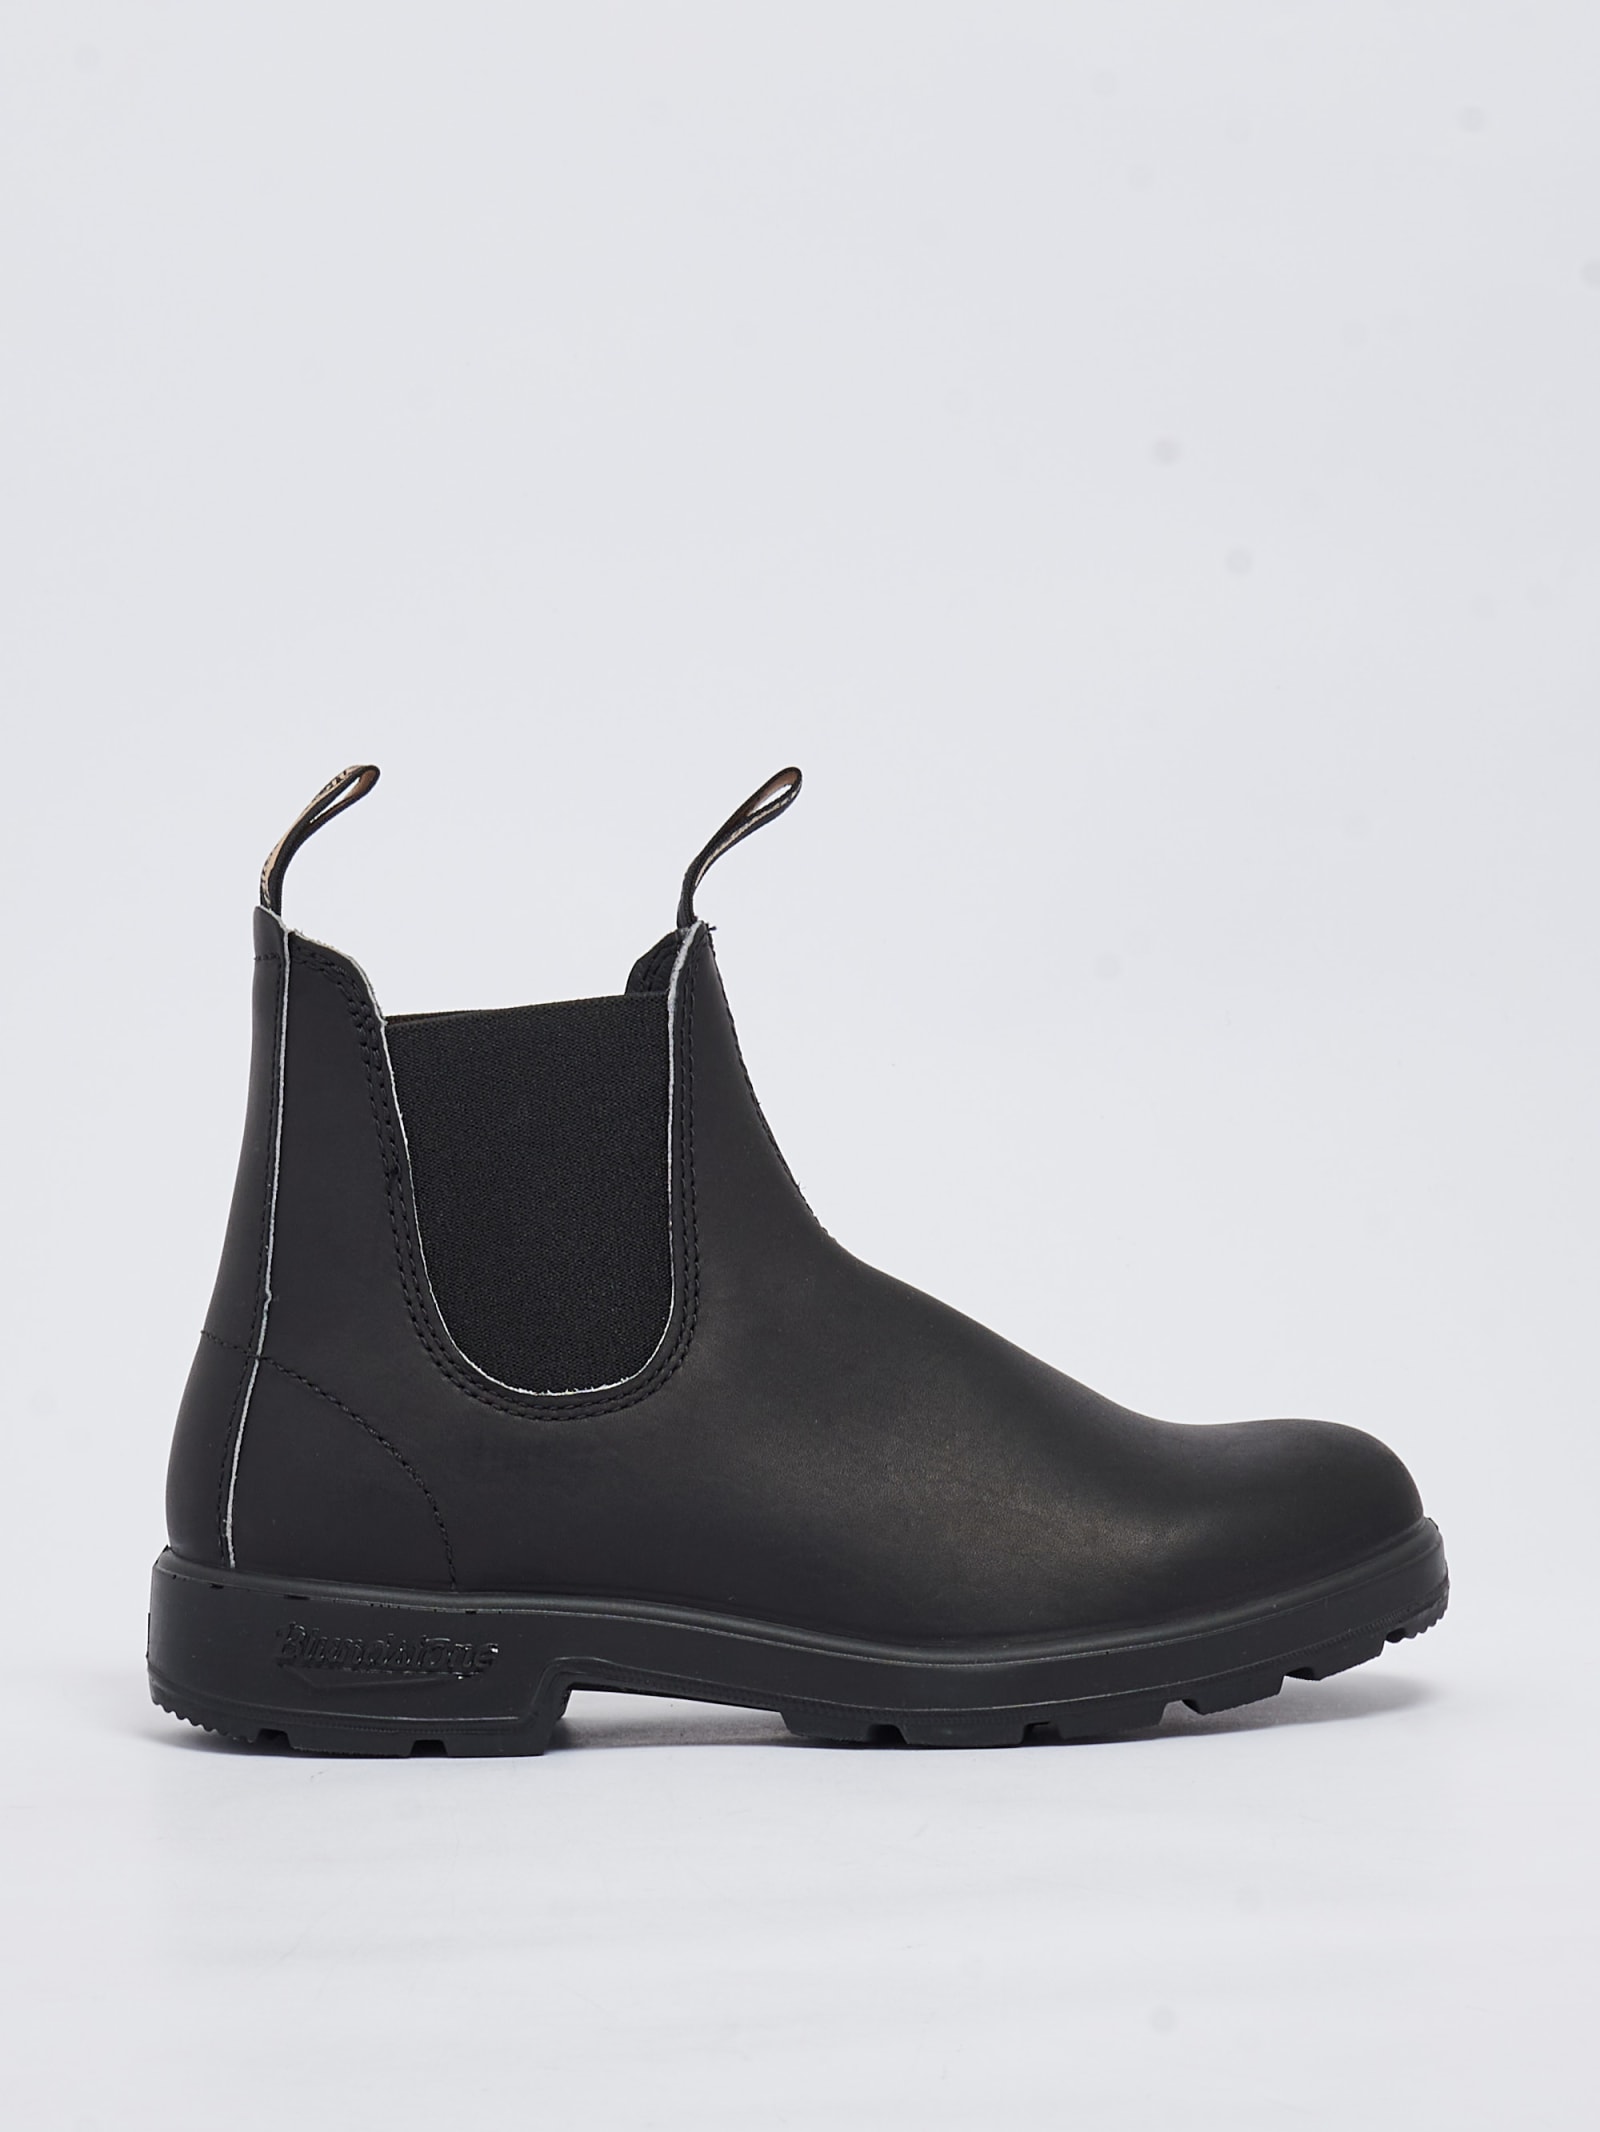 BLUNDSTONE 510 BLUNDSTONE COLLECTION BOOTS